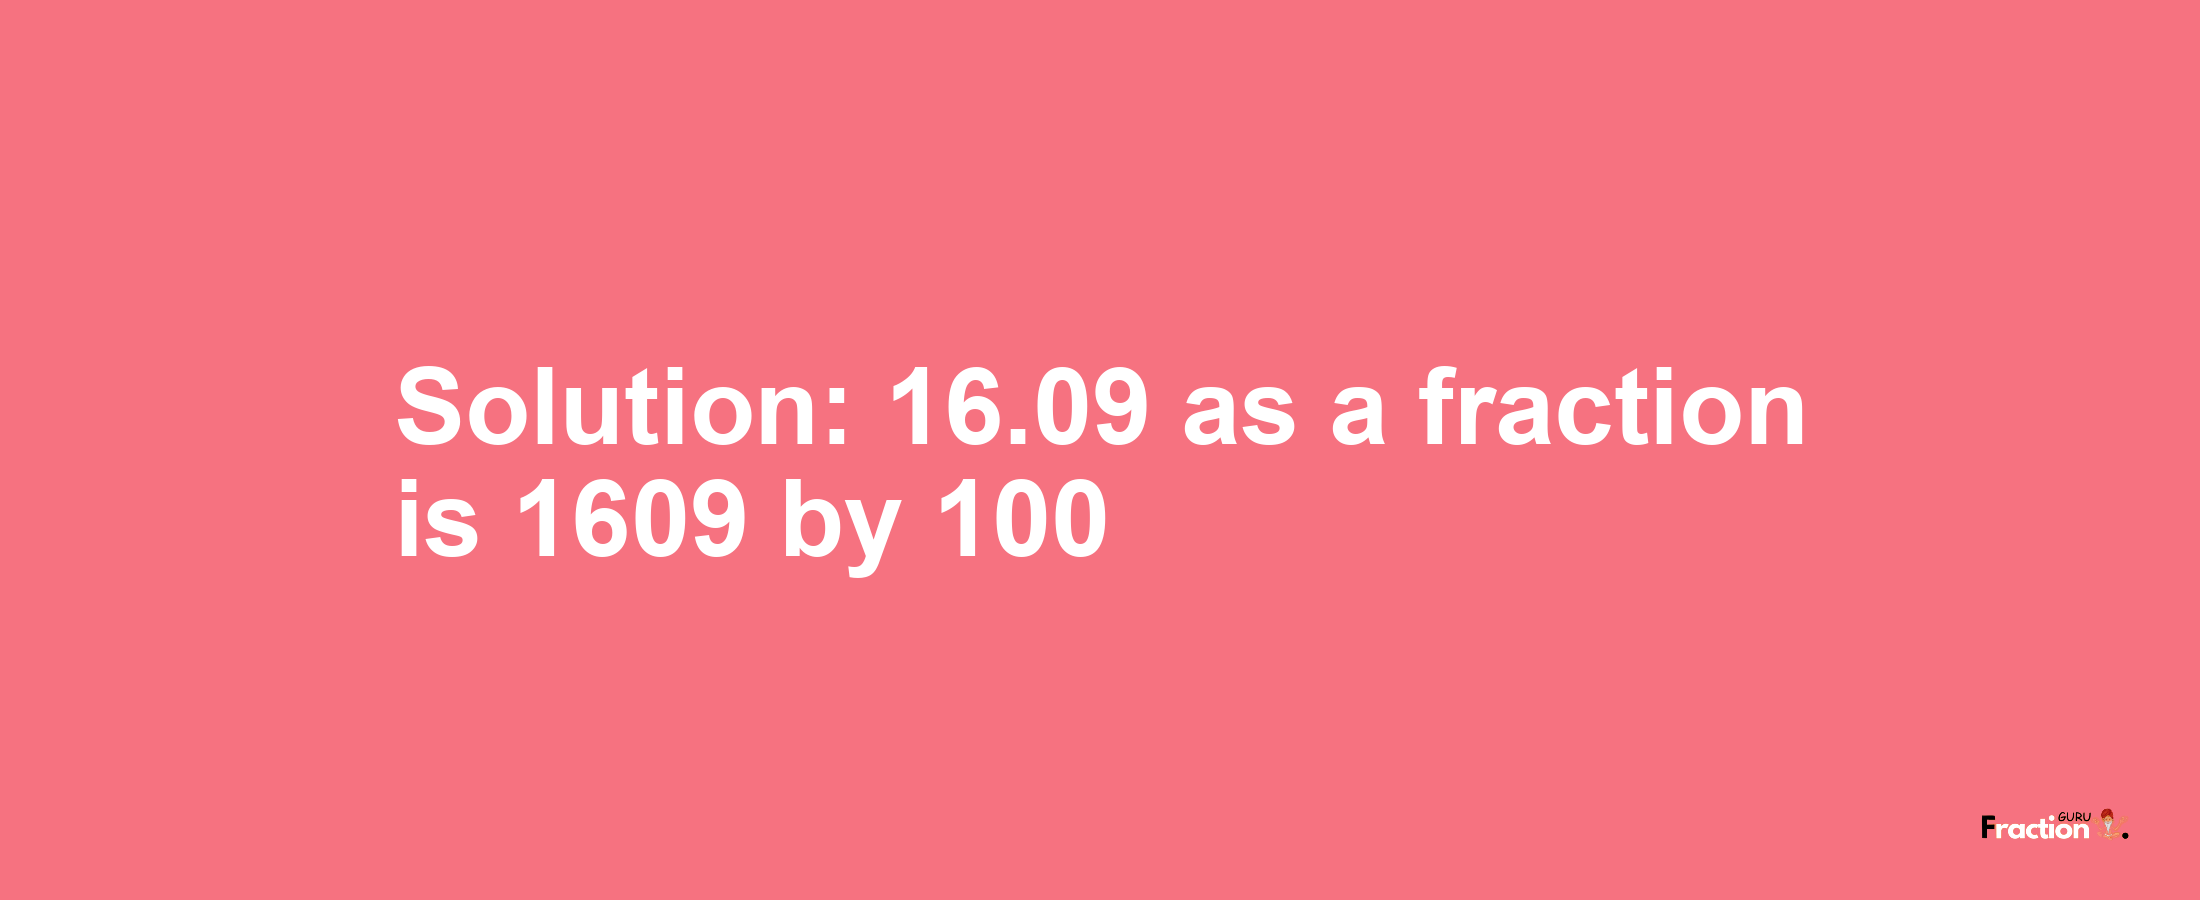 Solution:16.09 as a fraction is 1609/100